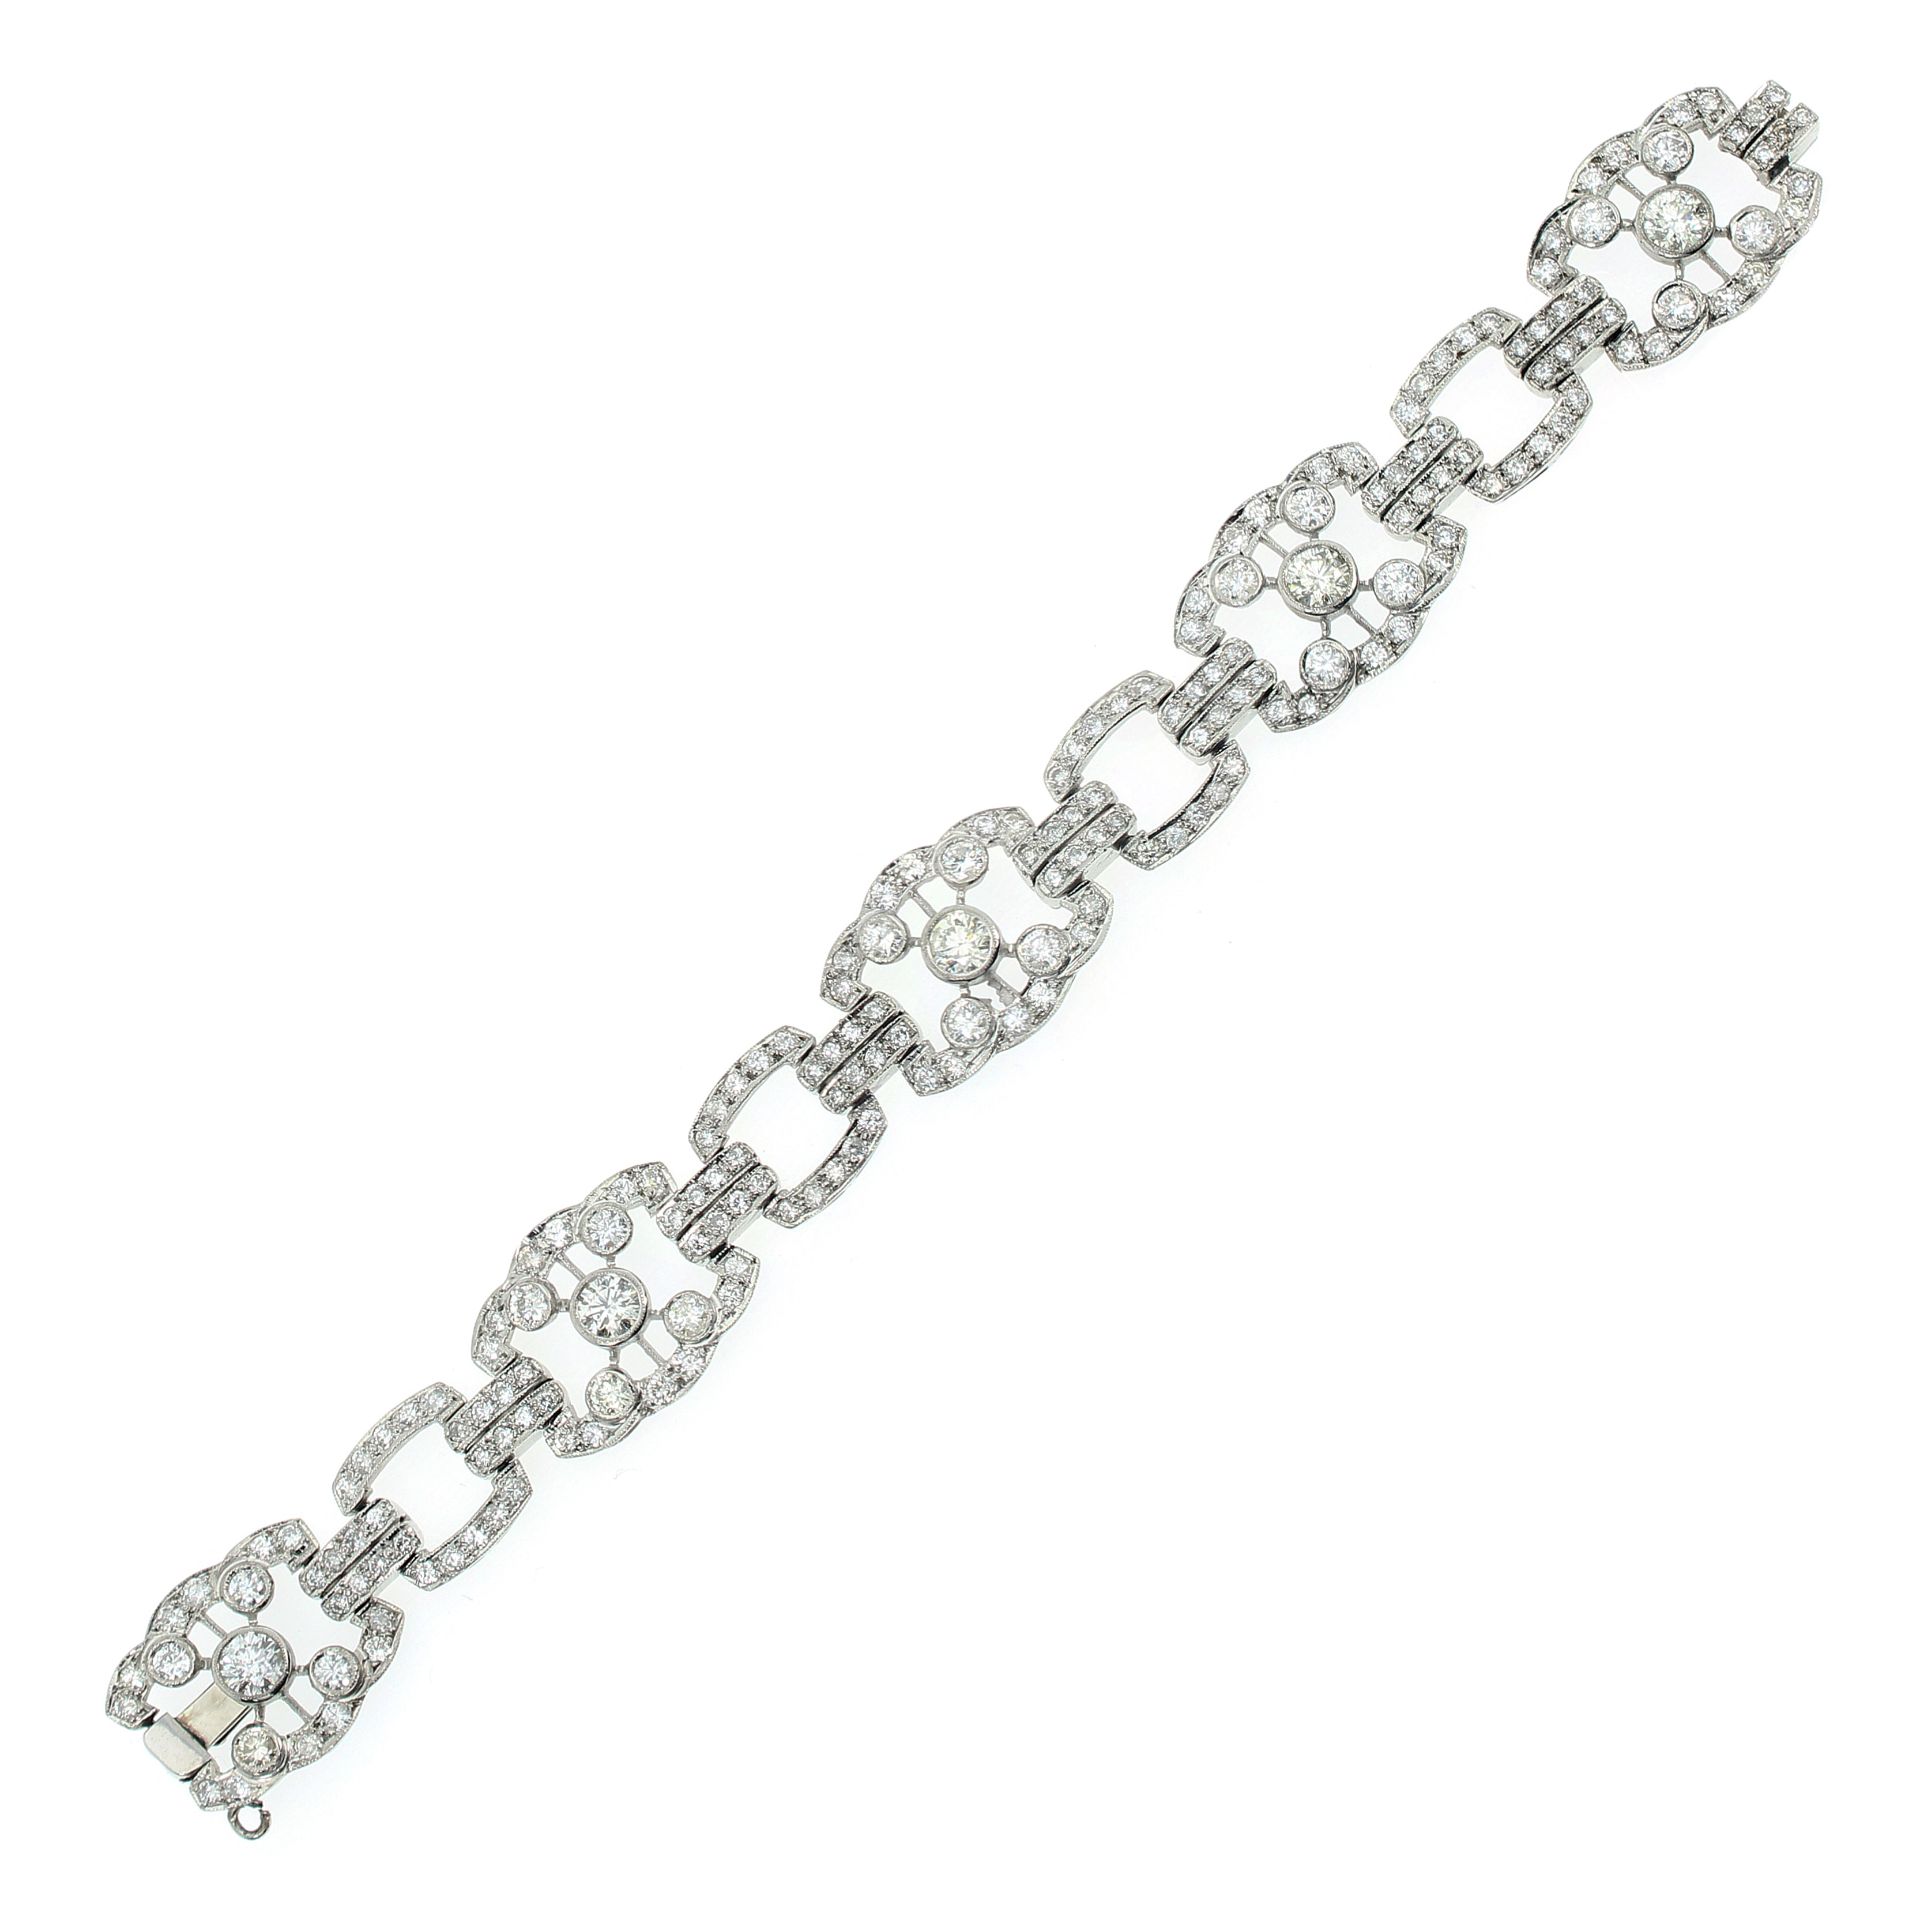 AN ANTIQUE DIAMOND BRACELET in white gold or platinum, comprising five fancy links, each set with